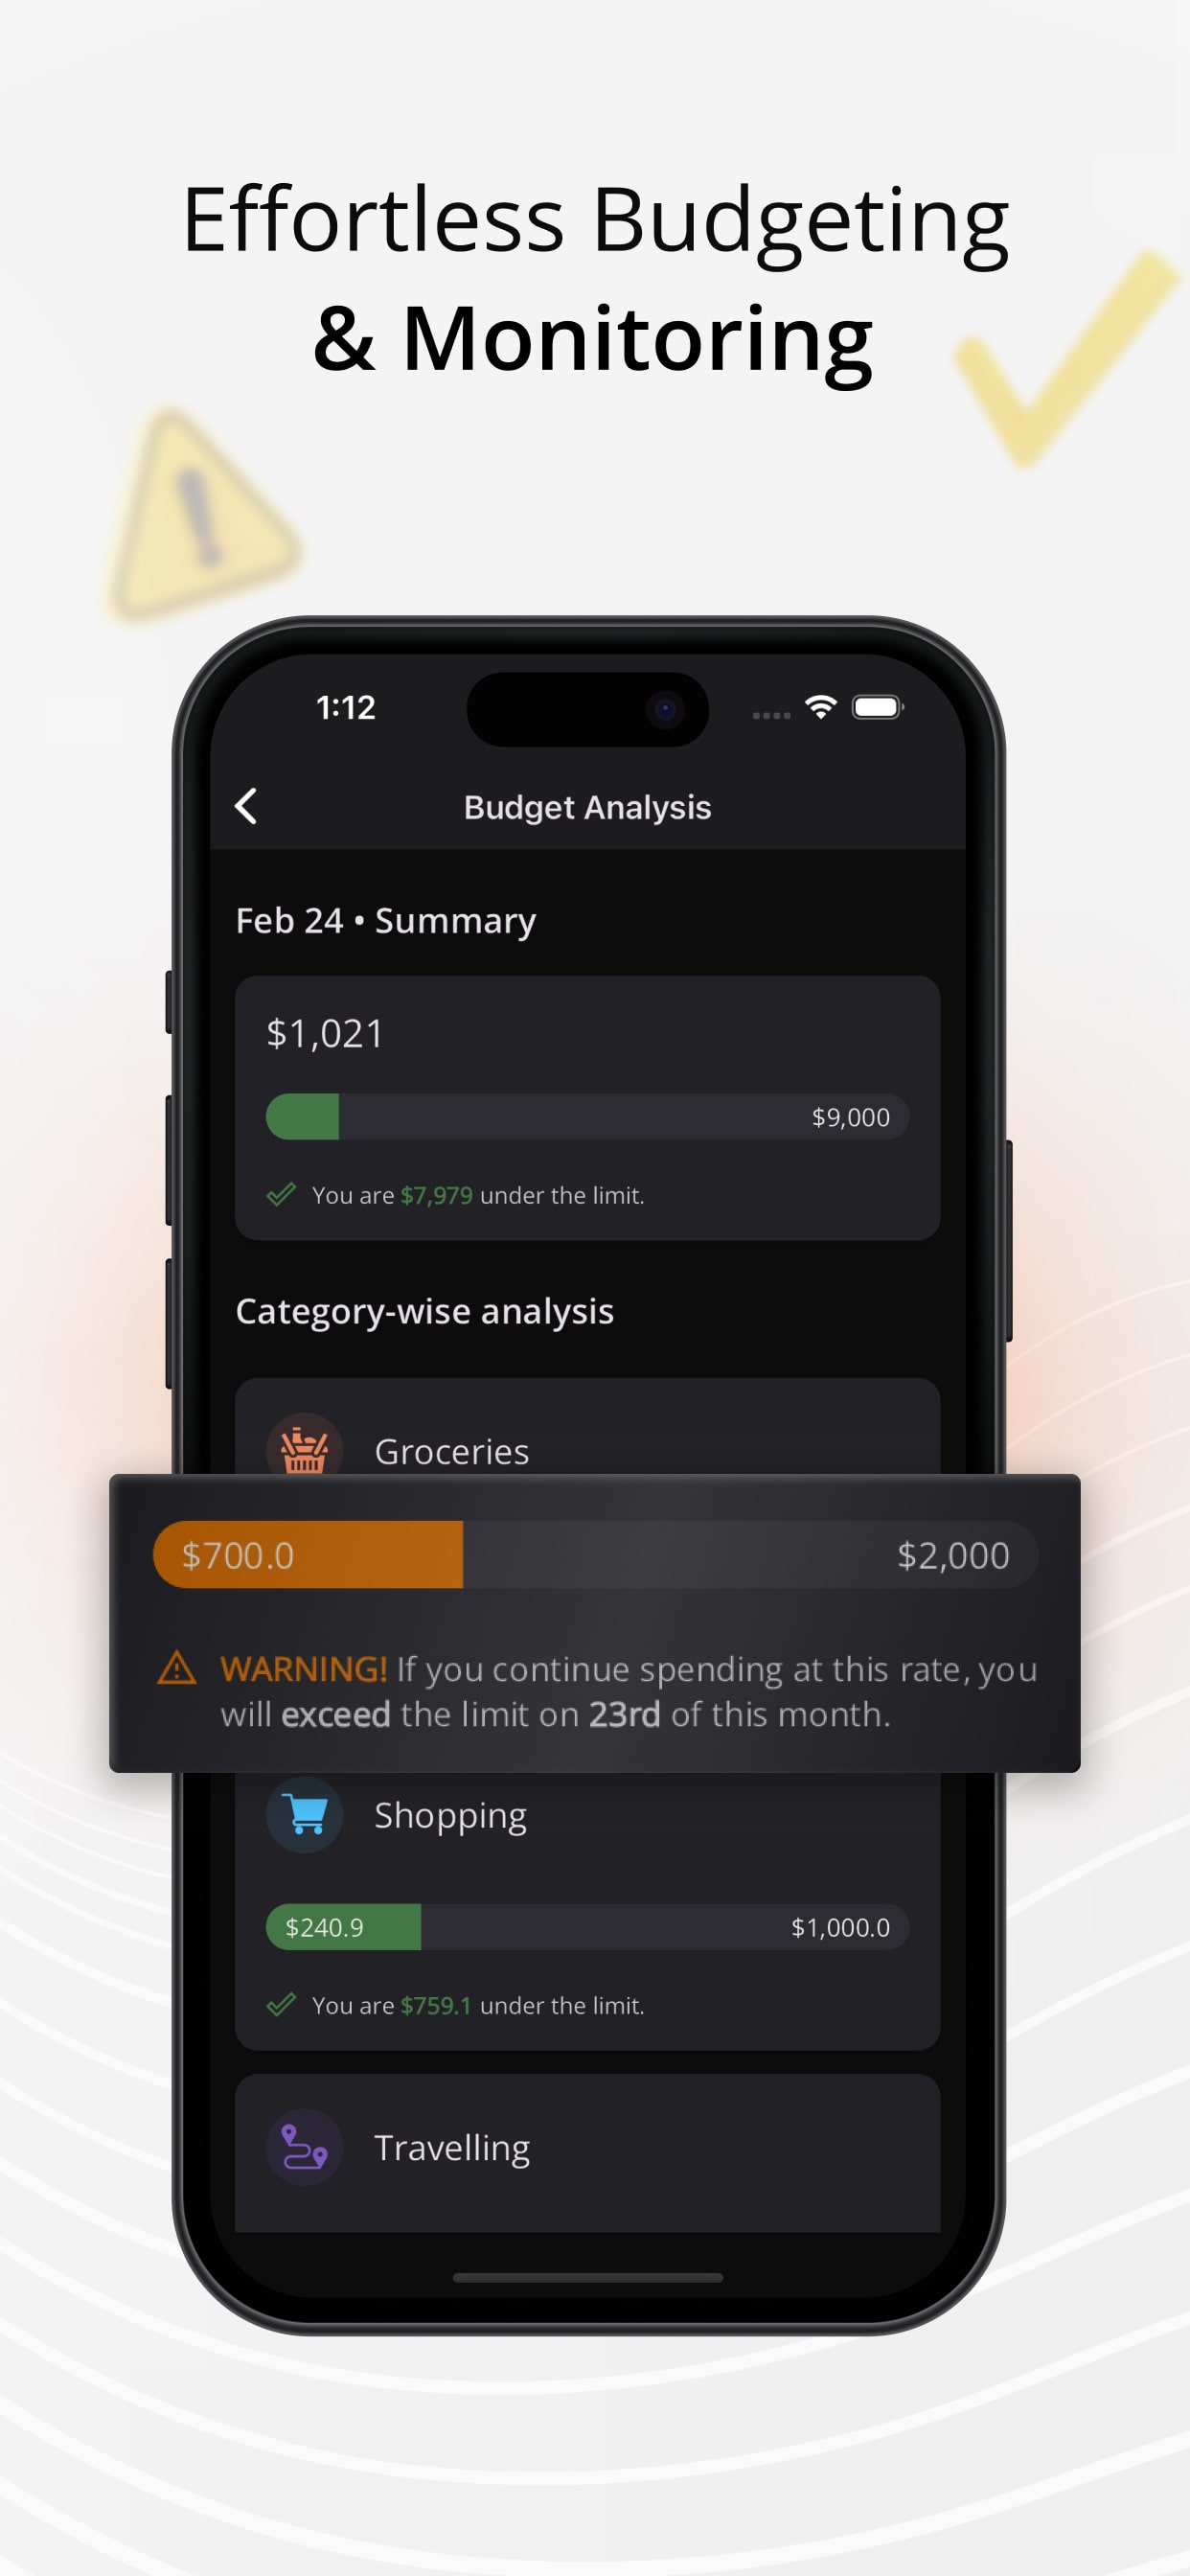 Effortless budgeting & monitoring - Expenses Manager